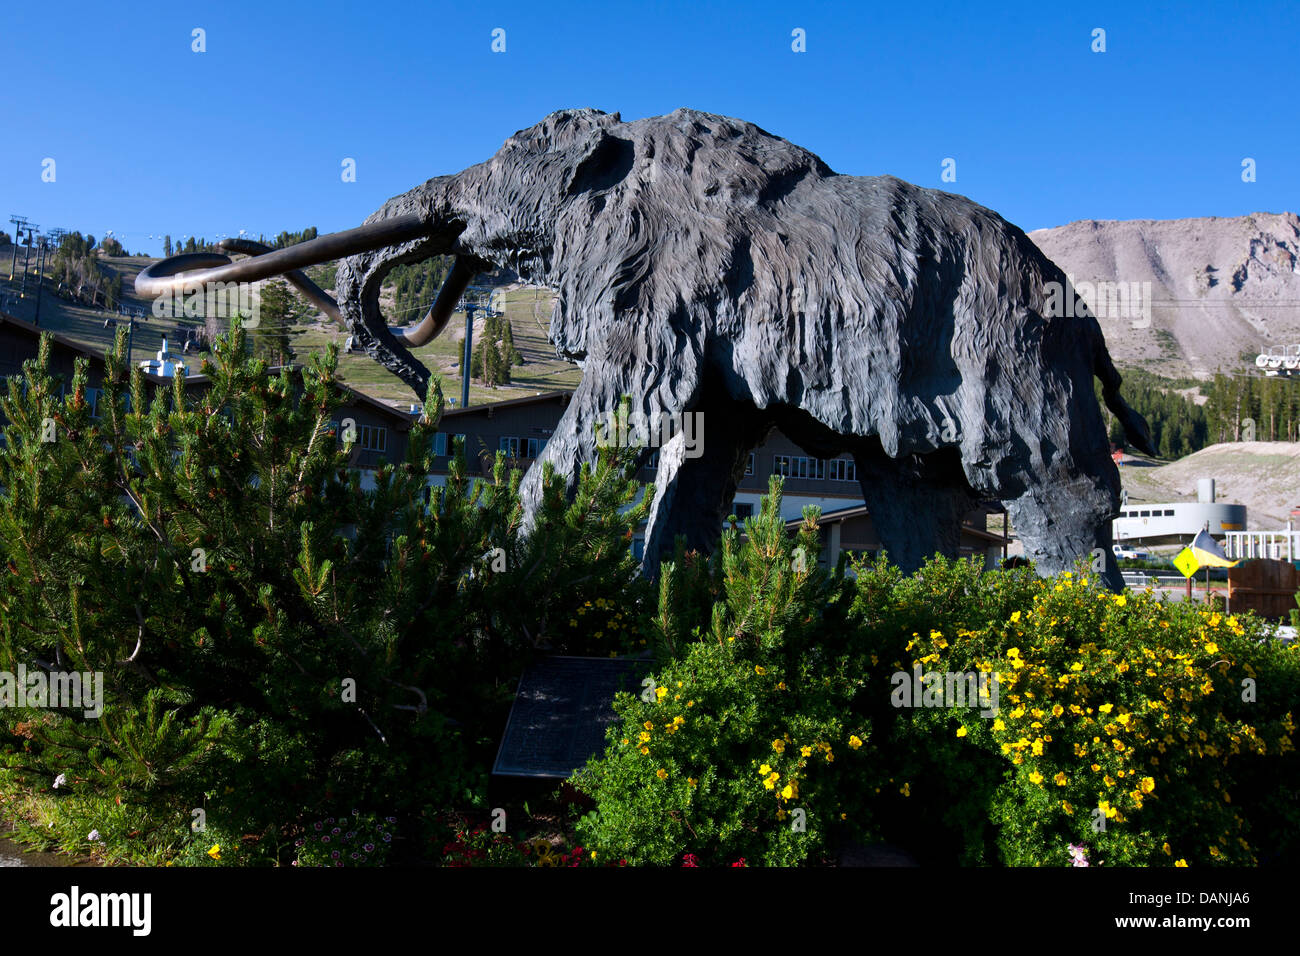 Statue of a Wooly Mammoth, Mammoth Mountain Ski Area, Mammoth, California, United States of America Stock Photo